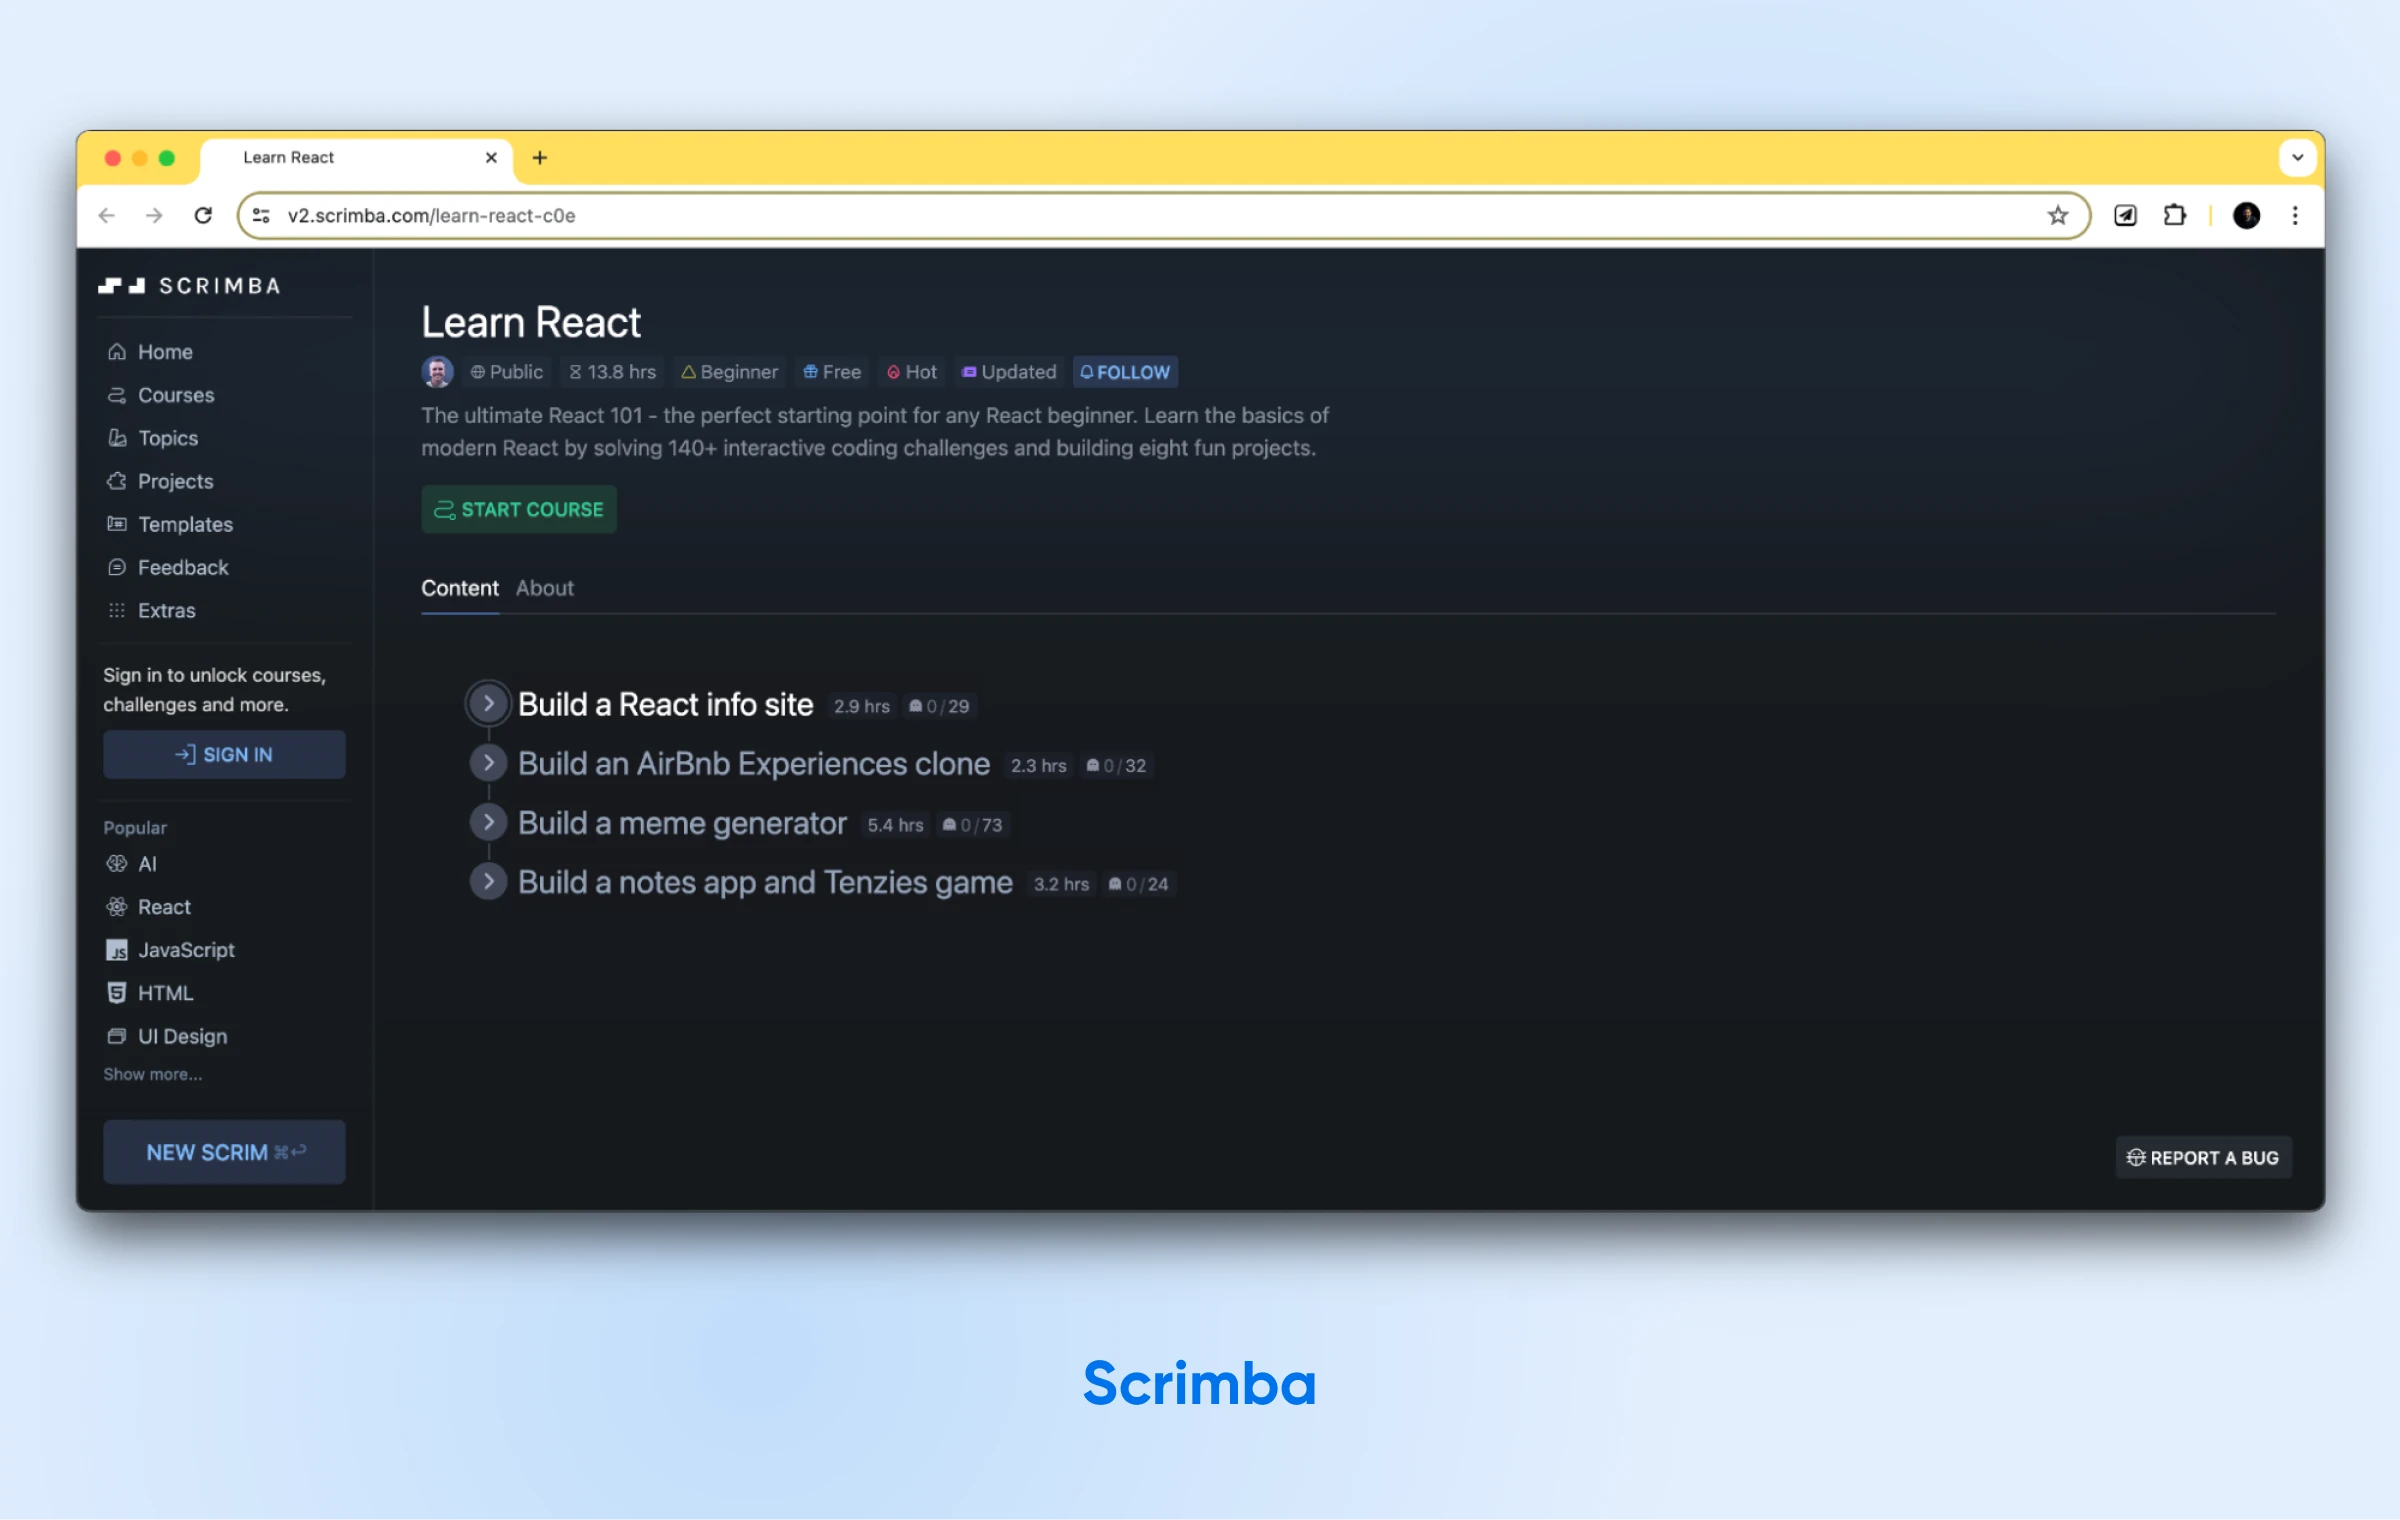 The home page for Scrimba's Learn React course has a dark background and a green "Start Course" button